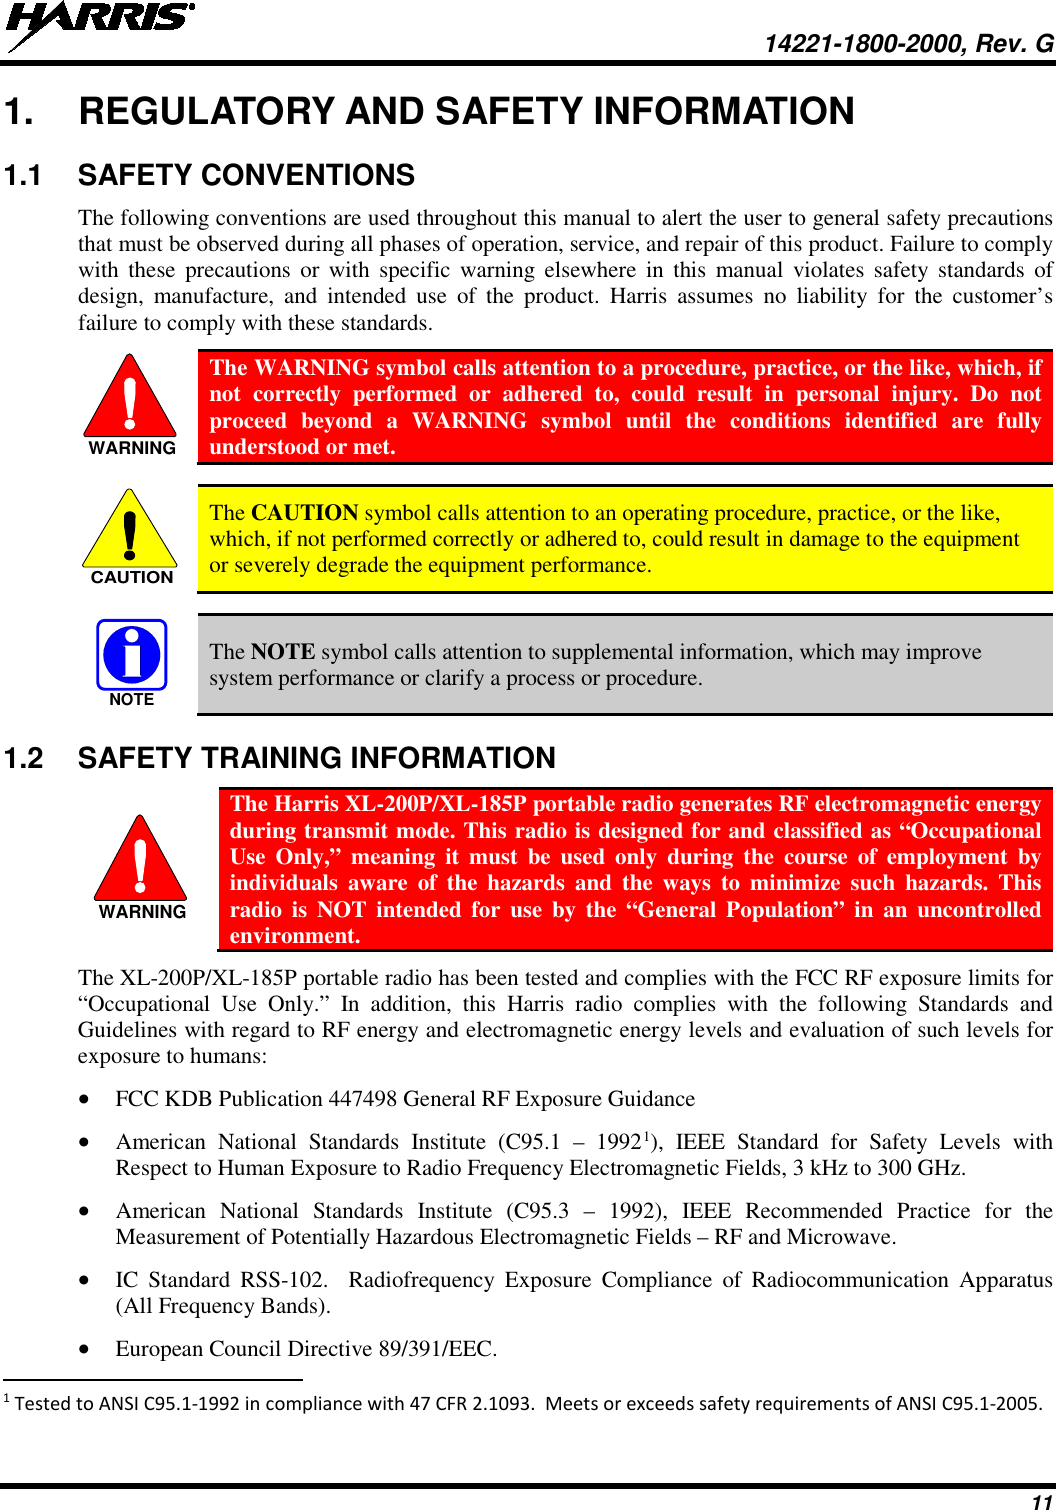  14221-1800-2000, Rev. G 11 1. REGULATORY AND SAFETY INFORMATION 1.1 SAFETY CONVENTIONS The following conventions are used throughout this manual to alert the user to general safety precautions that must be observed during all phases of operation, service, and repair of this product. Failure to comply with these precautions or with specific warning elsewhere in this manual violates safety standards of design, manufacture, and intended use of the product. Harris assumes no liability for the customer’s failure to comply with these standards.  The WARNING symbol calls attention to a procedure, practice, or the like, which, if not correctly performed or adhered to, could result in personal injury. Do not proceed beyond a WARNING symbol until the conditions identified are fully understood or met.     The CAUTION symbol calls attention to an operating procedure, practice, or the like, which, if not performed correctly or adhered to, could result in damage to the equipment or severely degrade the equipment performance.     The NOTE symbol calls attention to supplemental information, which may improve system performance or clarify a process or procedure. 1.2 SAFETY TRAINING INFORMATION  The Harris XL-200P/XL-185P portable radio generates RF electromagnetic energy during transmit mode. This radio is designed for and classified as “Occupational Use Only,” meaning it must be used only during the course of employment by individuals aware of the hazards and the ways to minimize such hazards. This radio is NOT intended for use by the “General Population” in an uncontrolled environment. The XL-200P/XL-185P portable radio has been tested and complies with the FCC RF exposure limits for “Occupational Use Only.”  In addition, this Harris radio complies with the following Standards and Guidelines with regard to RF energy and electromagnetic energy levels and evaluation of such levels for exposure to humans: • FCC KDB Publication 447498 General RF Exposure Guidance • American National Standards Institute (C95.1 –  19921), IEEE Standard for Safety Levels with Respect to Human Exposure to Radio Frequency Electromagnetic Fields, 3 kHz to 300 GHz. • American National Standards Institute (C95.3 –  1992), IEEE Recommended Practice for the Measurement of Potentially Hazardous Electromagnetic Fields – RF and Microwave. • IC Standard RSS-102.  Radiofrequency Exposure Compliance of Radiocommunication Apparatus (All Frequency Bands). • European Council Directive 89/391/EEC.                                                            1 Tested to ANSI C95.1-1992 in compliance with 47 CFR 2.1093.  Meets or exceeds safety requirements of ANSI C95.1-2005. WARNINGCAUTIONNOTEWARNING